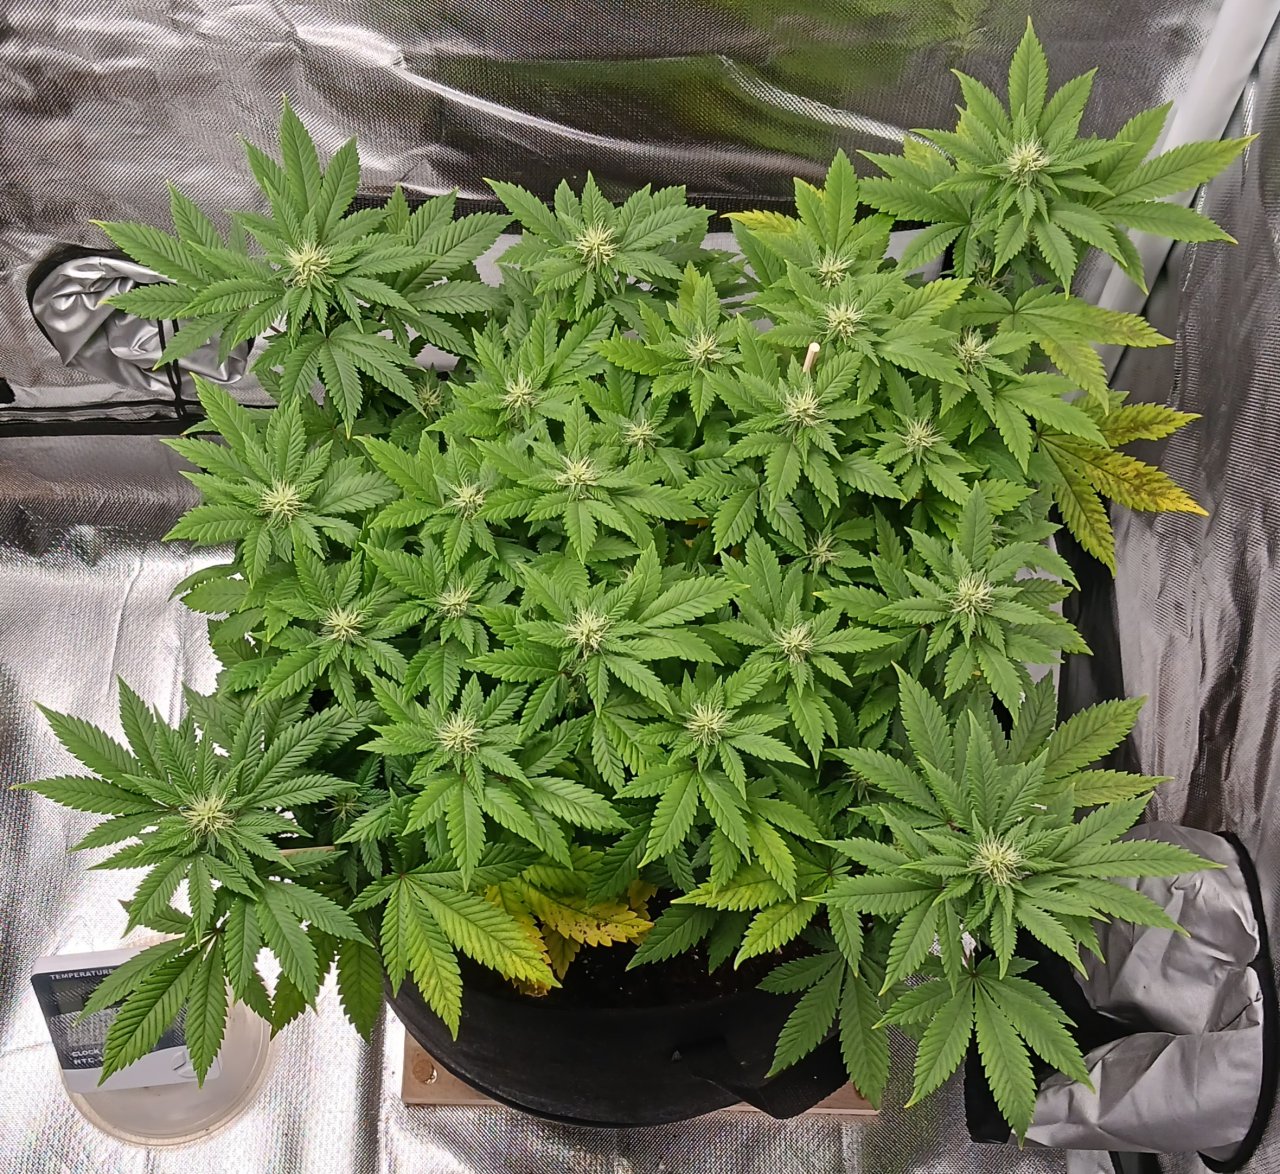 Viparspectra Grow 05 March 2023 Blueberry.jpg